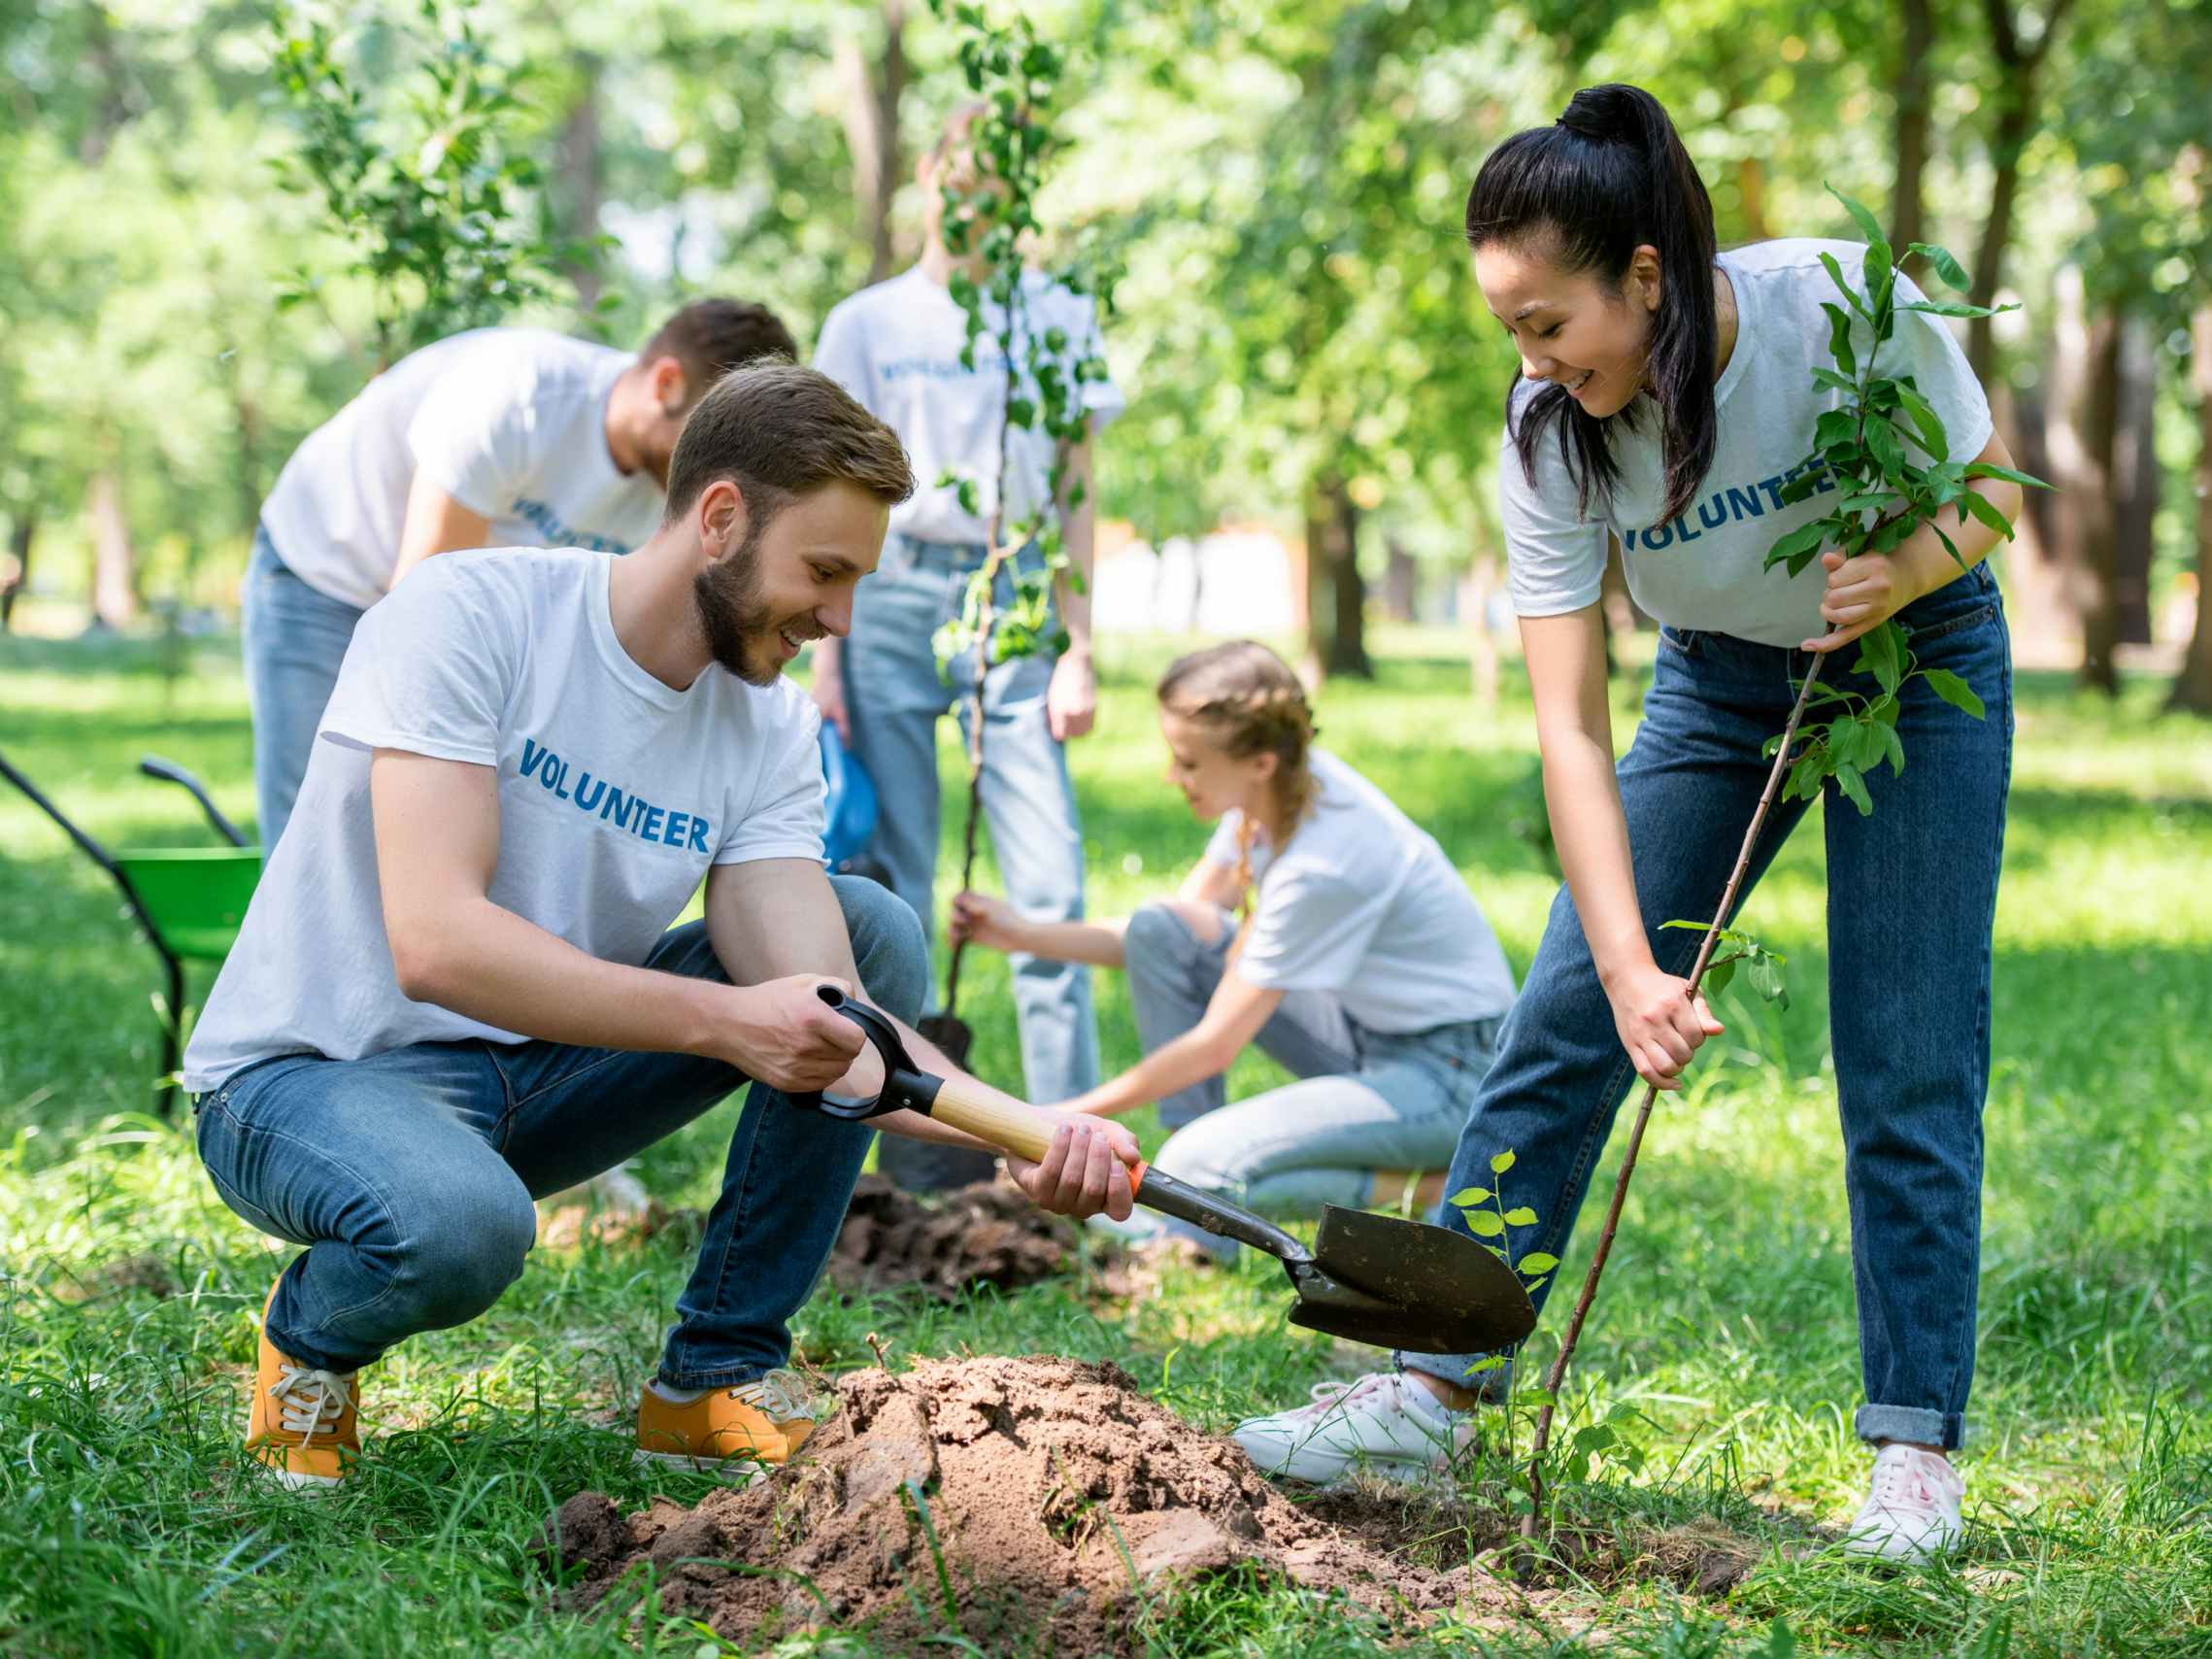 A group of people wearing volunteers shirts working together in a garden, planting a tree sapling.